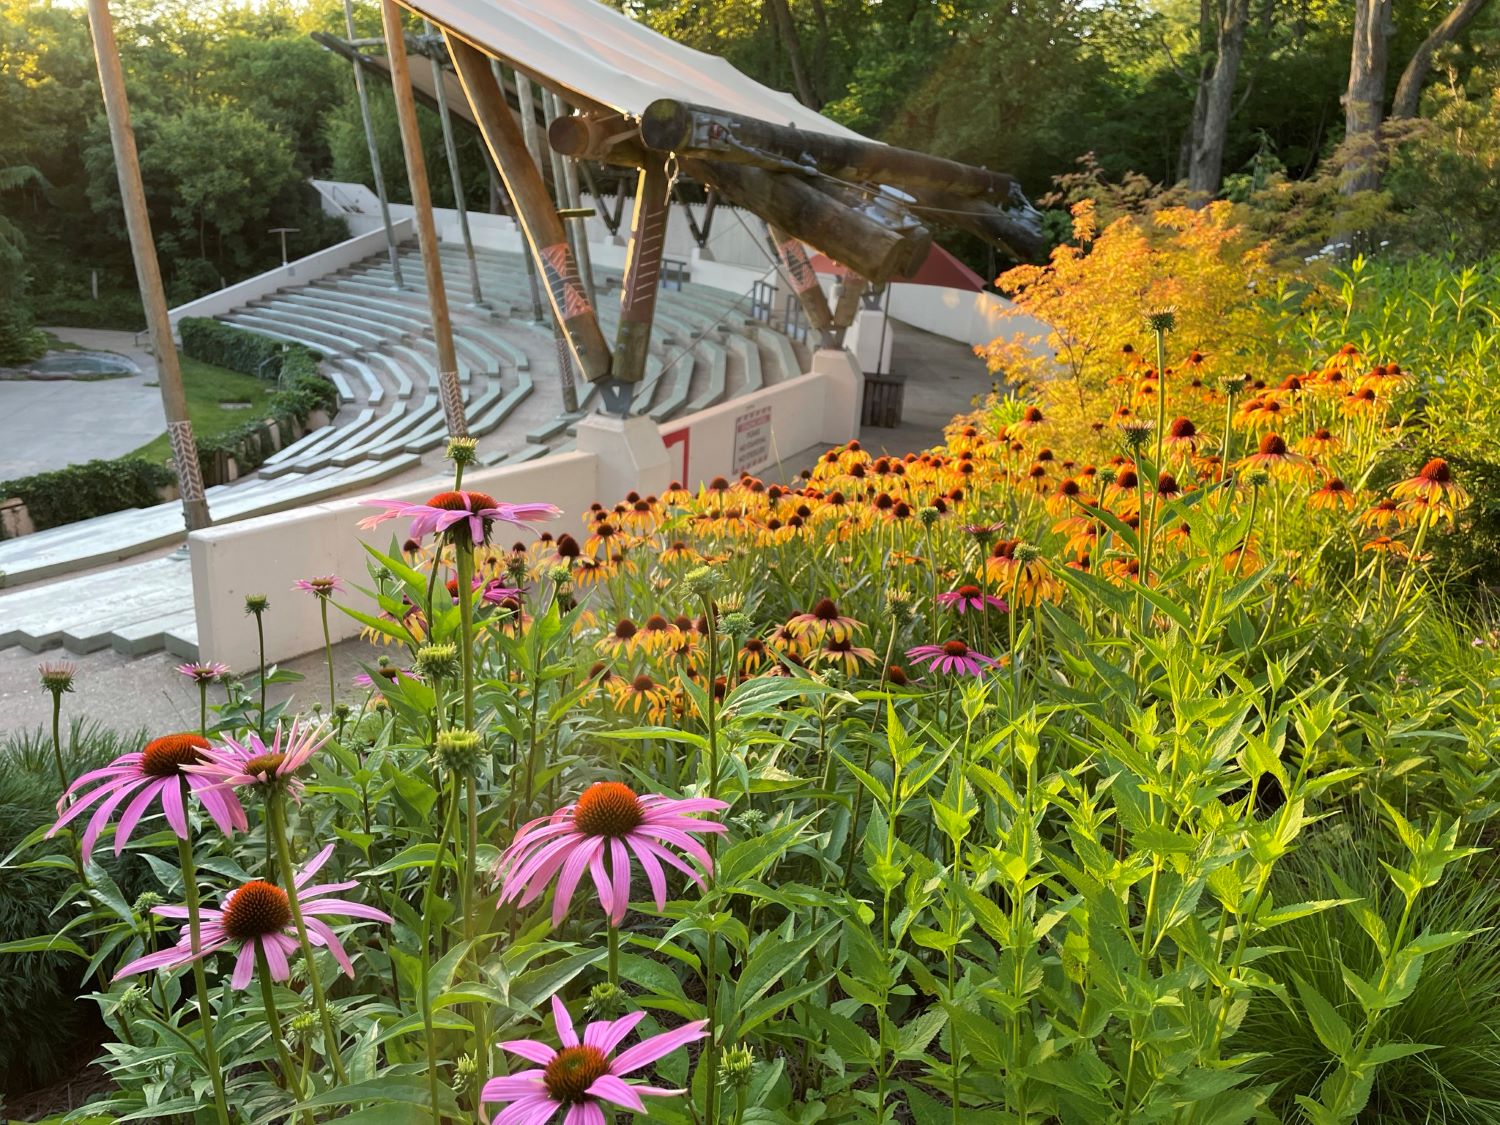 purple and yellow daisies blooming on the top side of the bird amphitheater